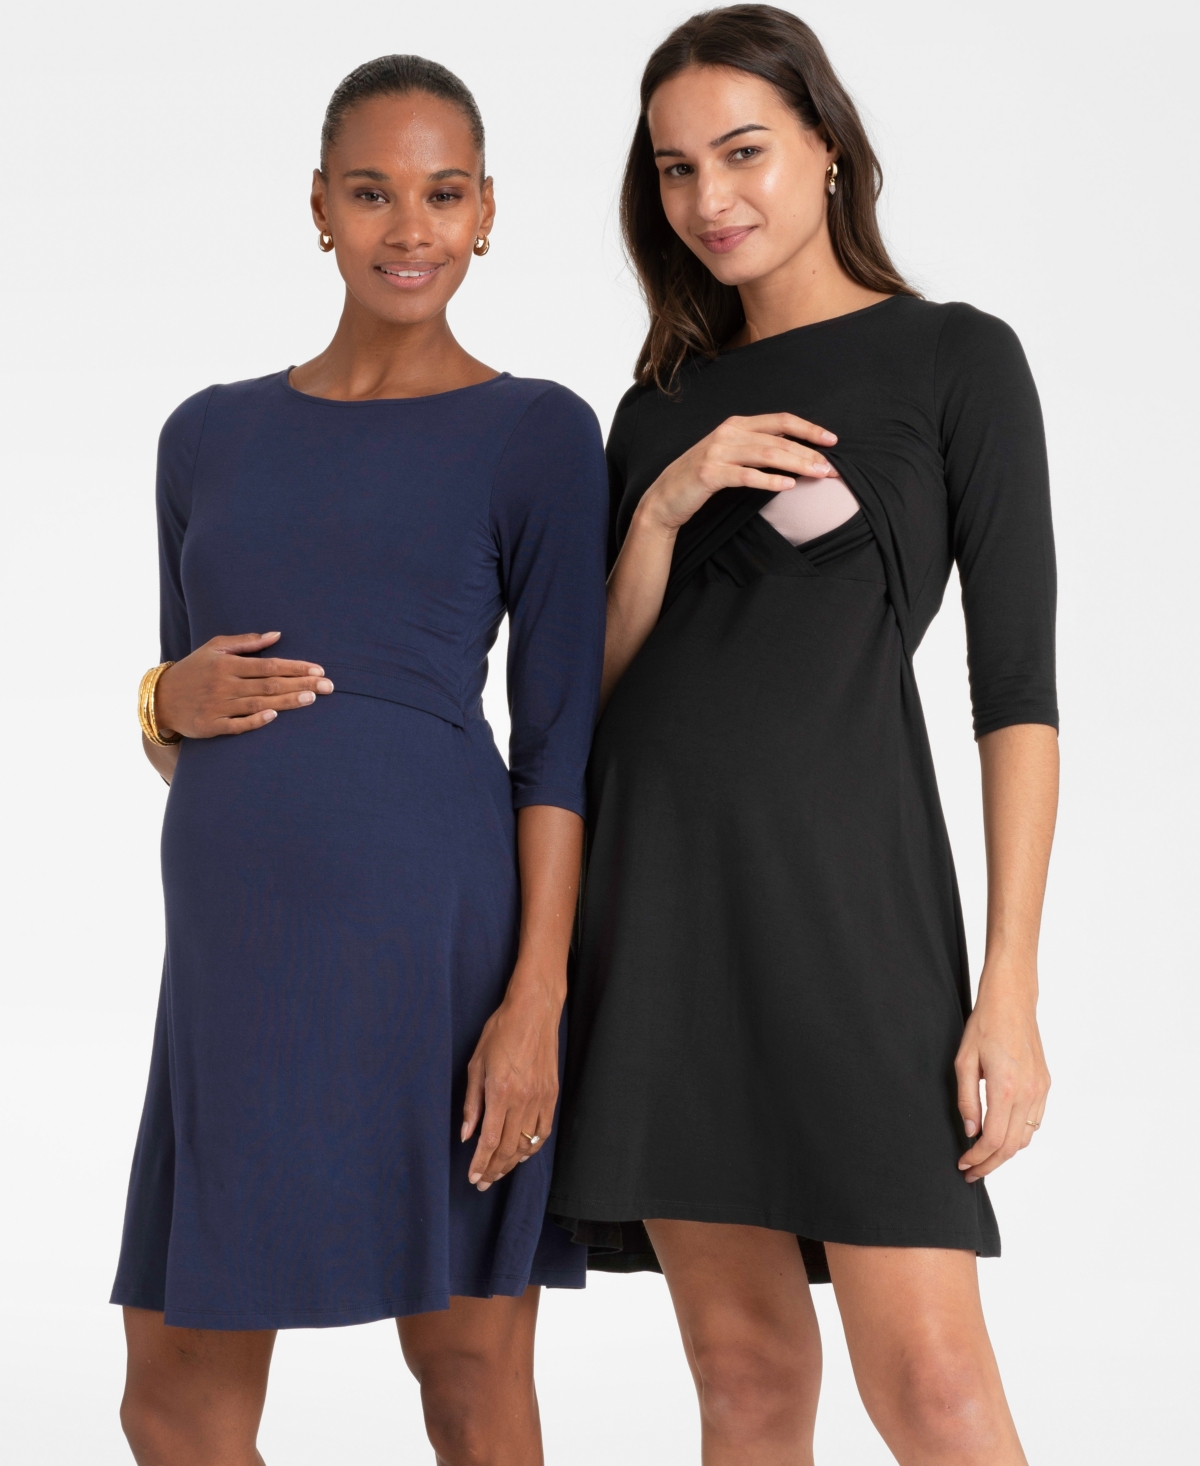 Shop Seraphine Women's Maternity And Nursing Dresses, Twin Pack In Black,navy